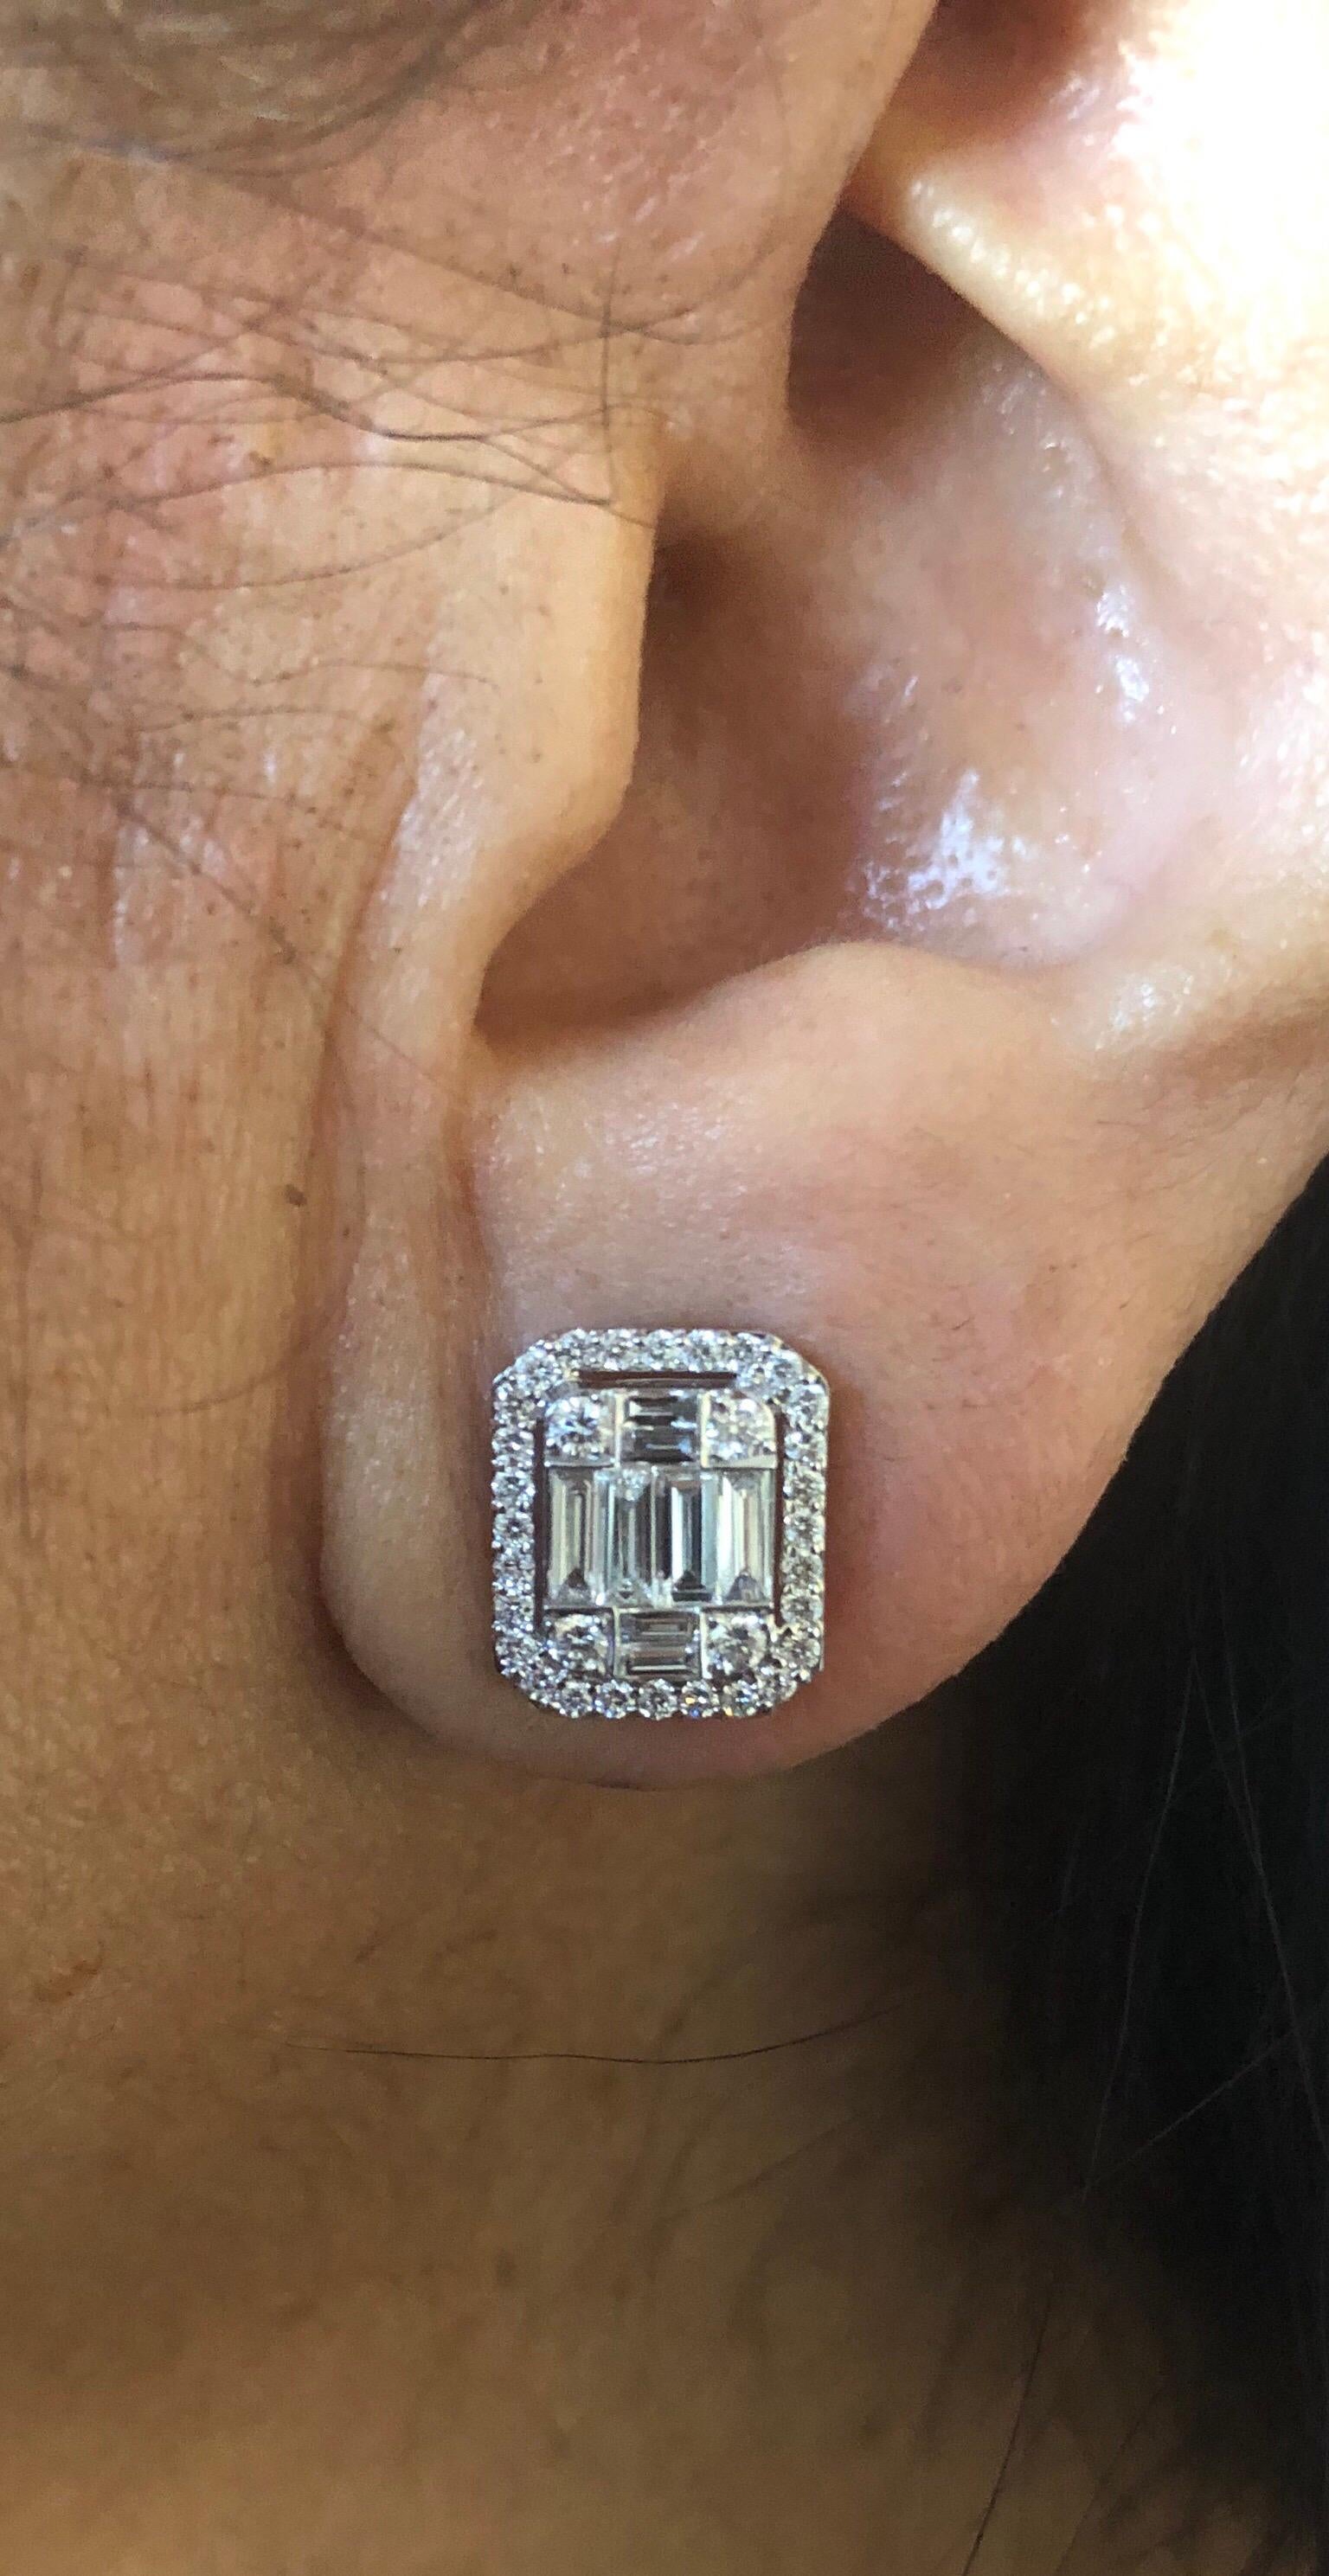 Emerald Cluster Earrings set in 18K white gold. The earrings are set with a cluster of baguette and round diamonds to create the illusion of a single emerald cut. This earring has the size of a 5 Carat Emerald cut stone. The total carat weight of